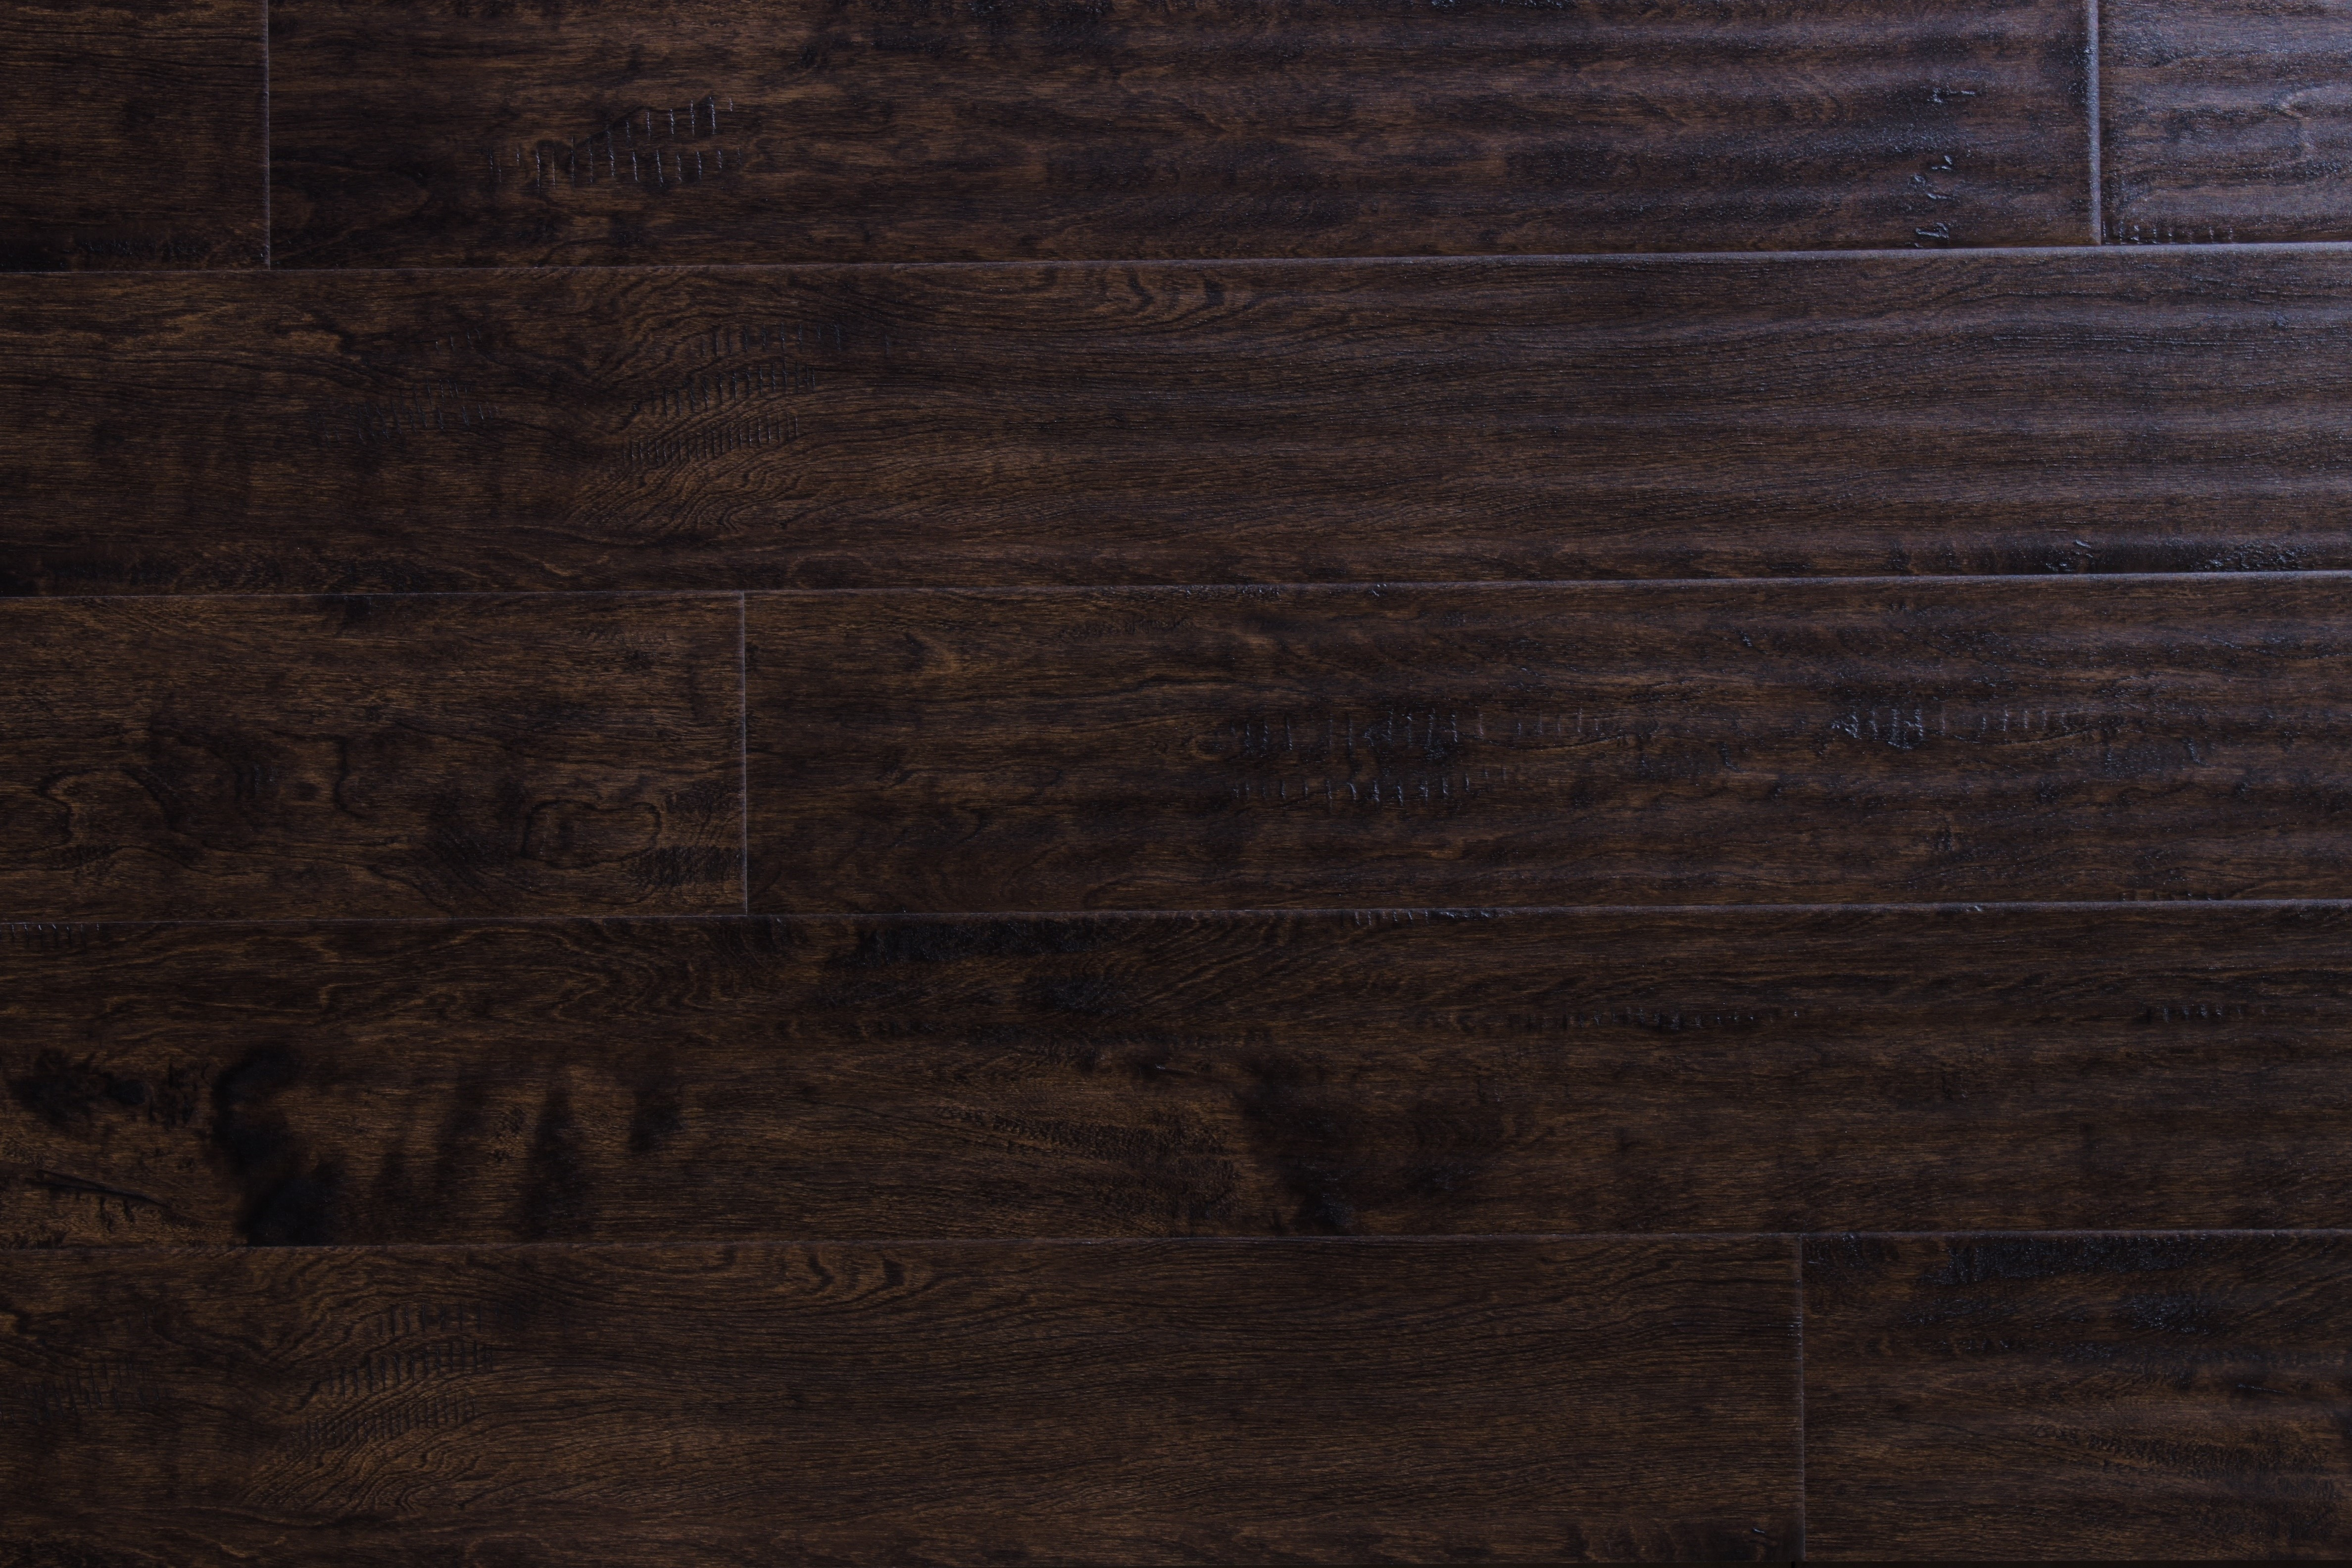 What is the Cost Of Hardwood Flooring Per Square Foot Of Wood Flooring Free Samples Available at Builddirecta within Tailor Multi Gb 5874277bb8d3c